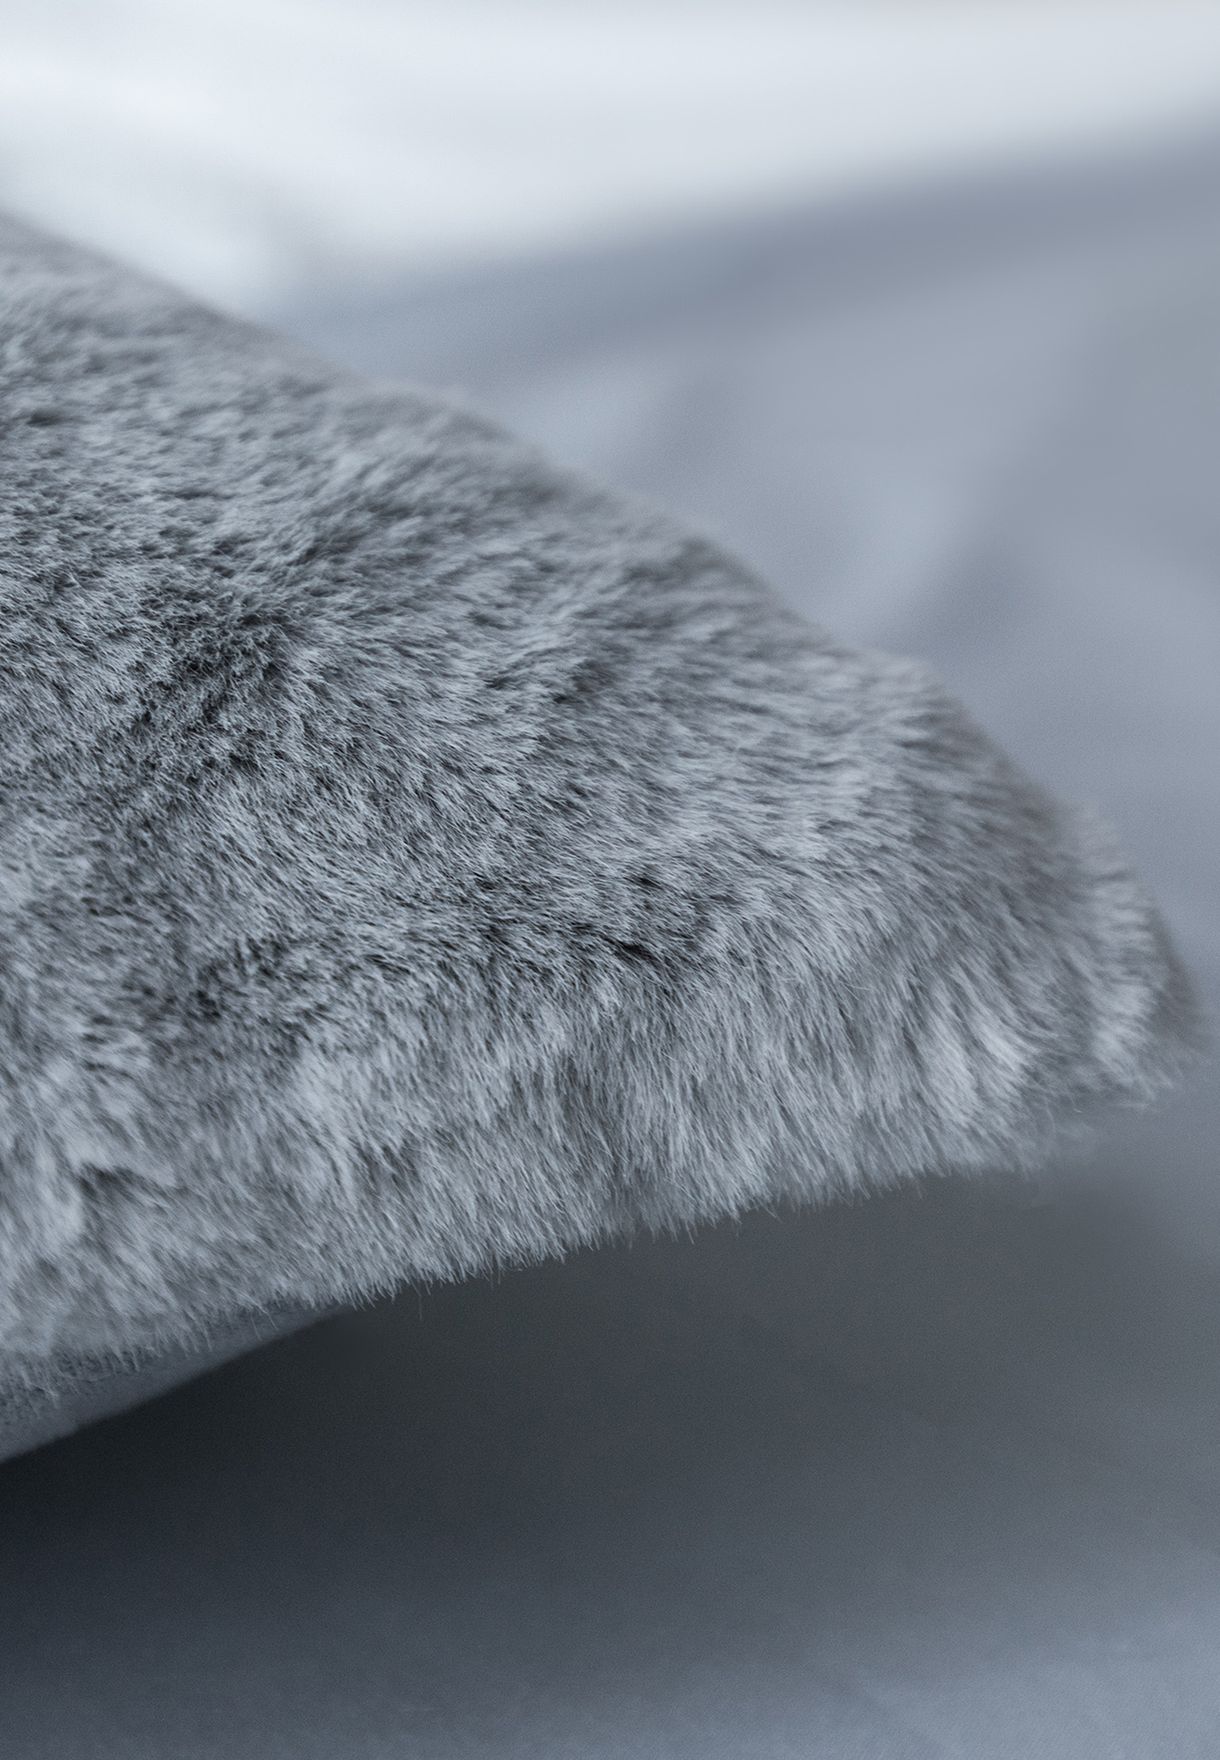 Faux Fur Cushion With Insert